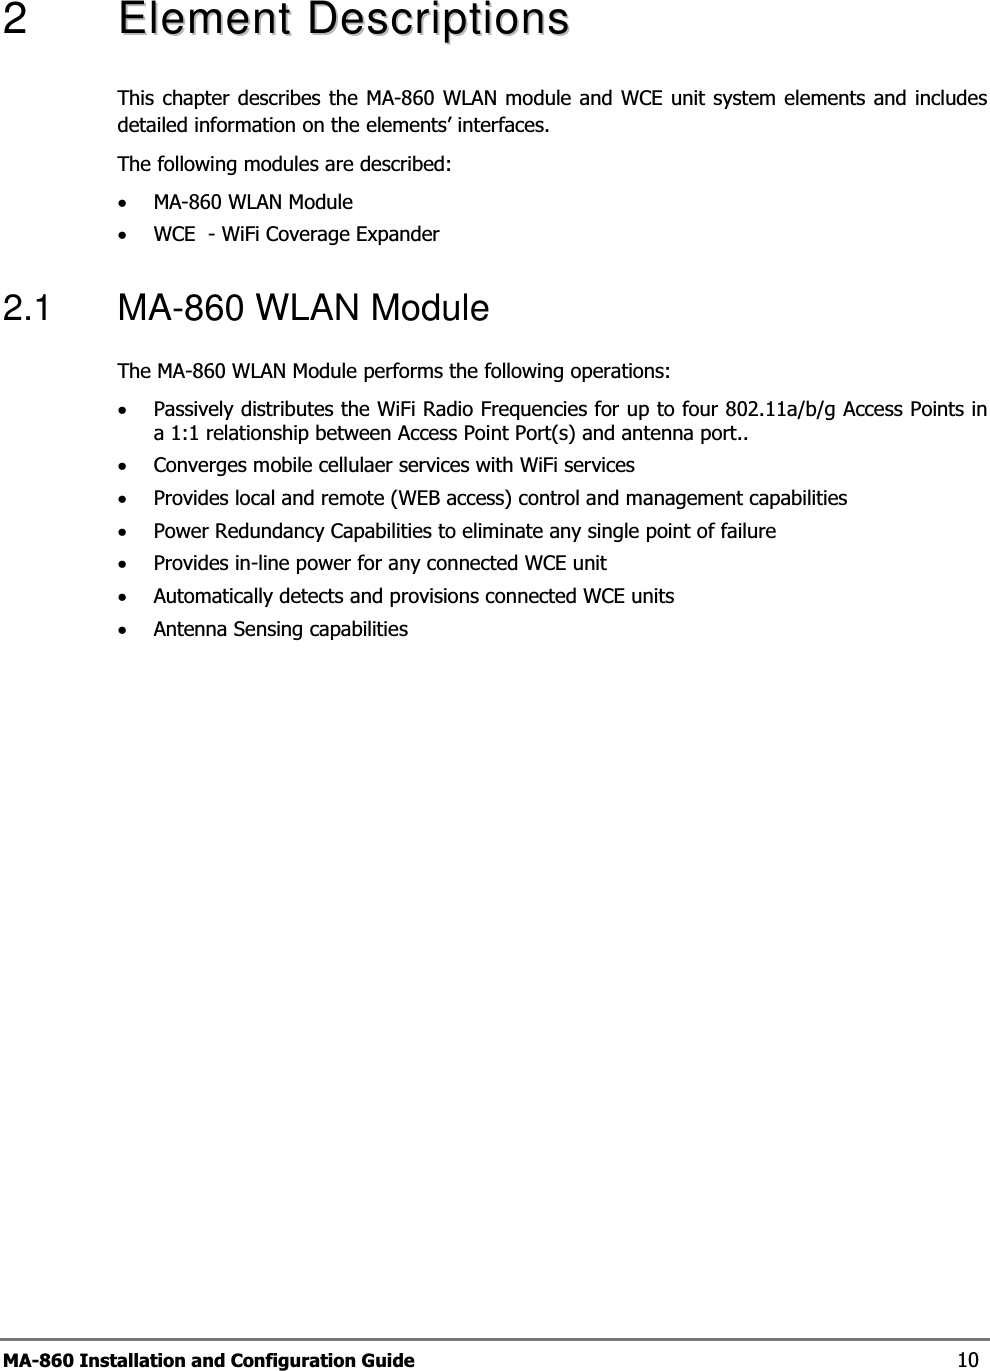 MA-860 Installation and Configuration Guide  10 2   EElleemmeennttDDeessccrriippttiioonnssThis chapter describes the MA-860 WLAN module and WCE unit system elements and includes detailed information on the elements’ interfaces. The following modules are described: •MA-860 WLAN Module •WCE  - WiFi Coverage Expander 2.1  MA-860 WLAN Module  The MA-860 WLAN Module performs the following operations: •Passively distributes the WiFi Radio Frequencies for up to four 802.11a/b/g Access Points in a 1:1 relationship between Access Point Port(s) and antenna port..   •Converges mobile cellulaer services with WiFi services •Provides local and remote (WEB access) control and management capabilities  •Power Redundancy Capabilities to eliminate any single point of failure •Provides in-line power for any connected WCE unit •Automatically detects and provisions connected WCE units •Antenna Sensing capabilities 